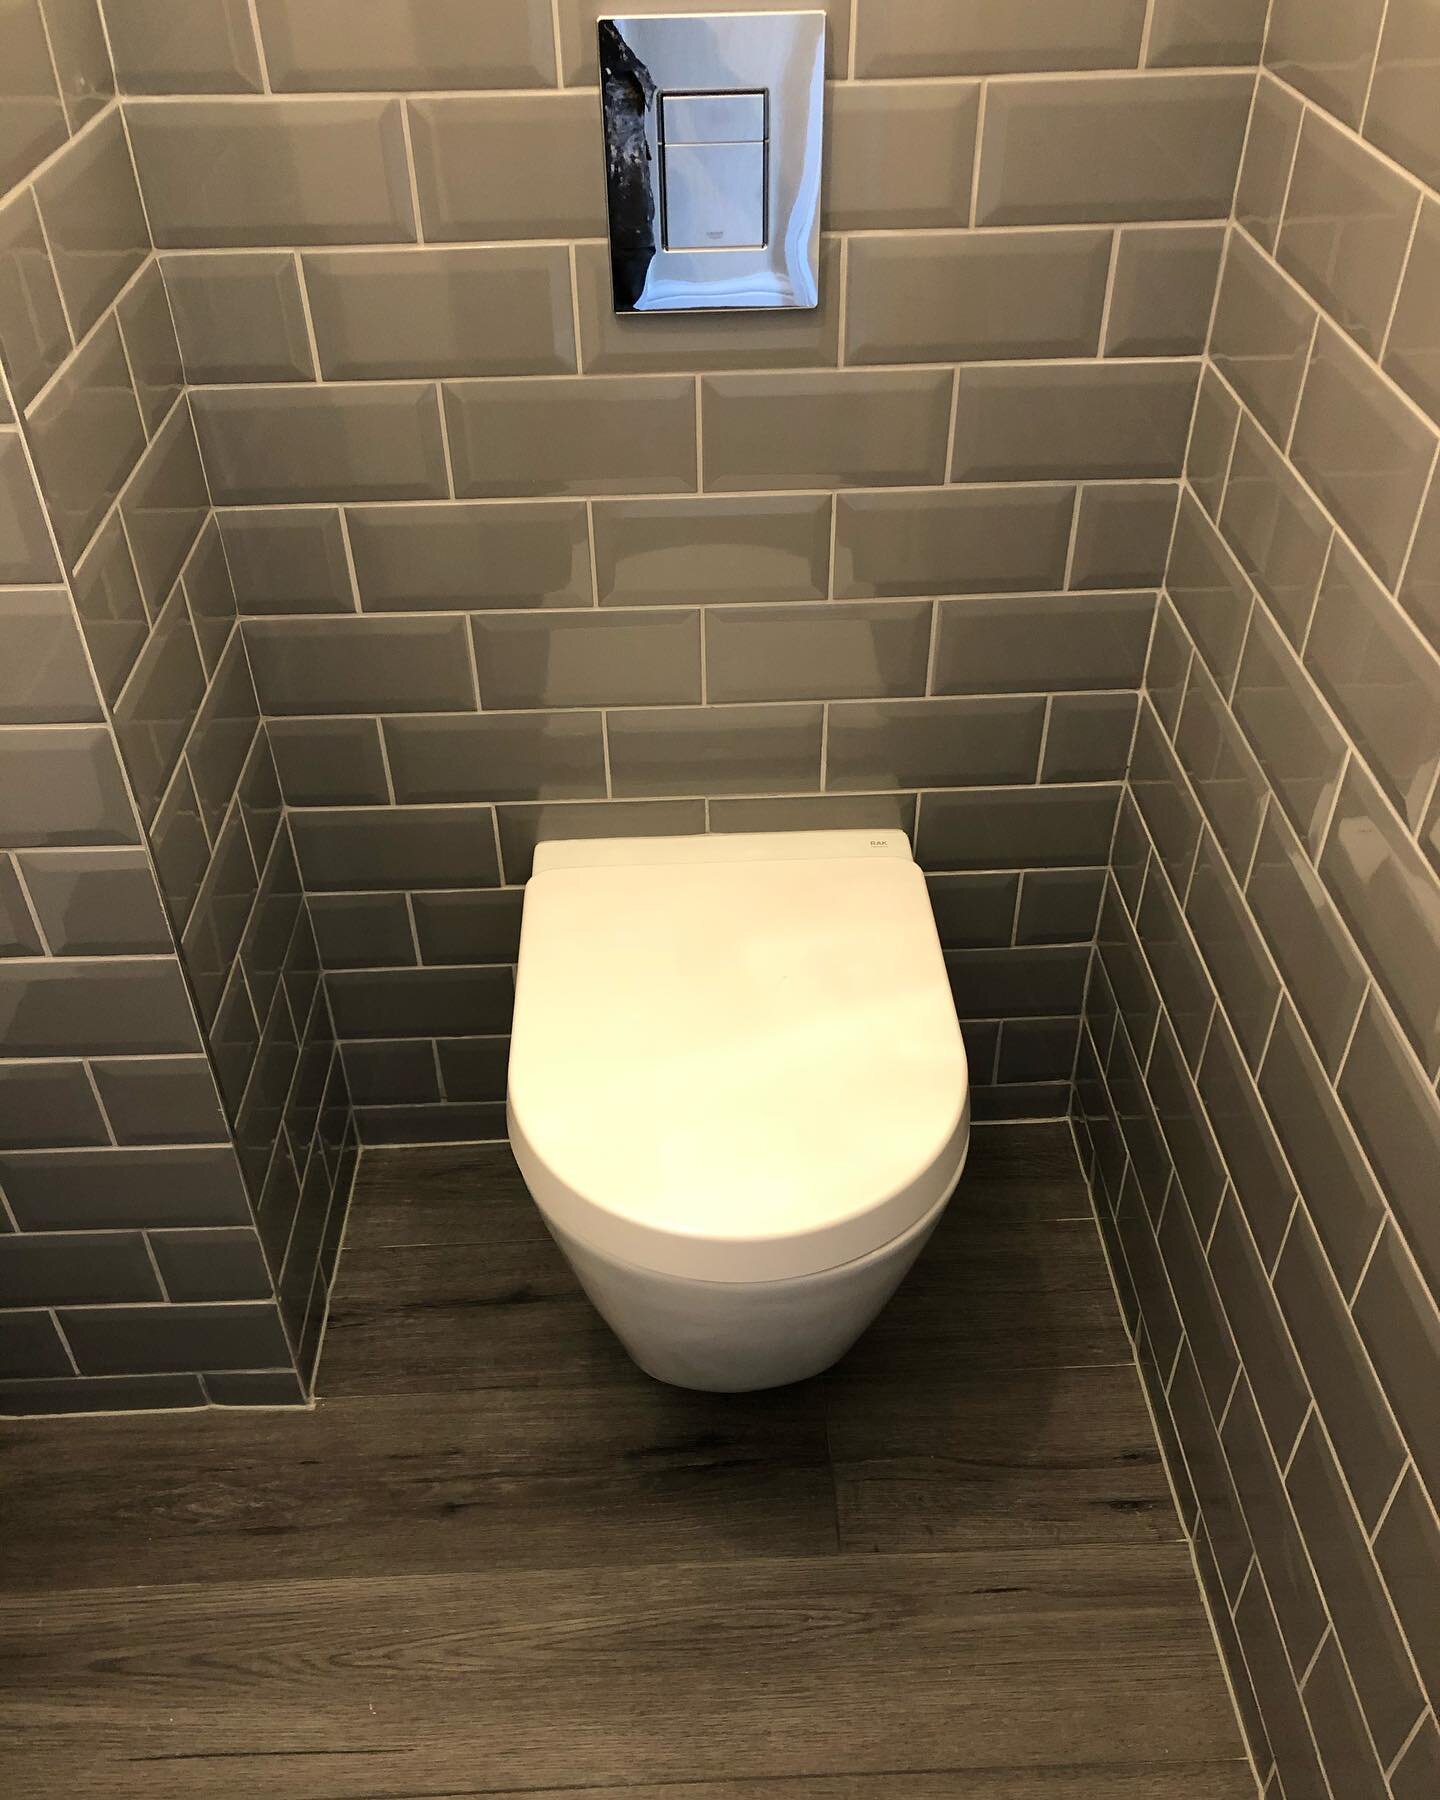 We wouldn&rsquo;t normally do a job this small but we recently did a bathroom and en-suite for the same customer. 

It looks really really good though and we managed to turn an original builders not so great bathroom with all the pipe work showing or